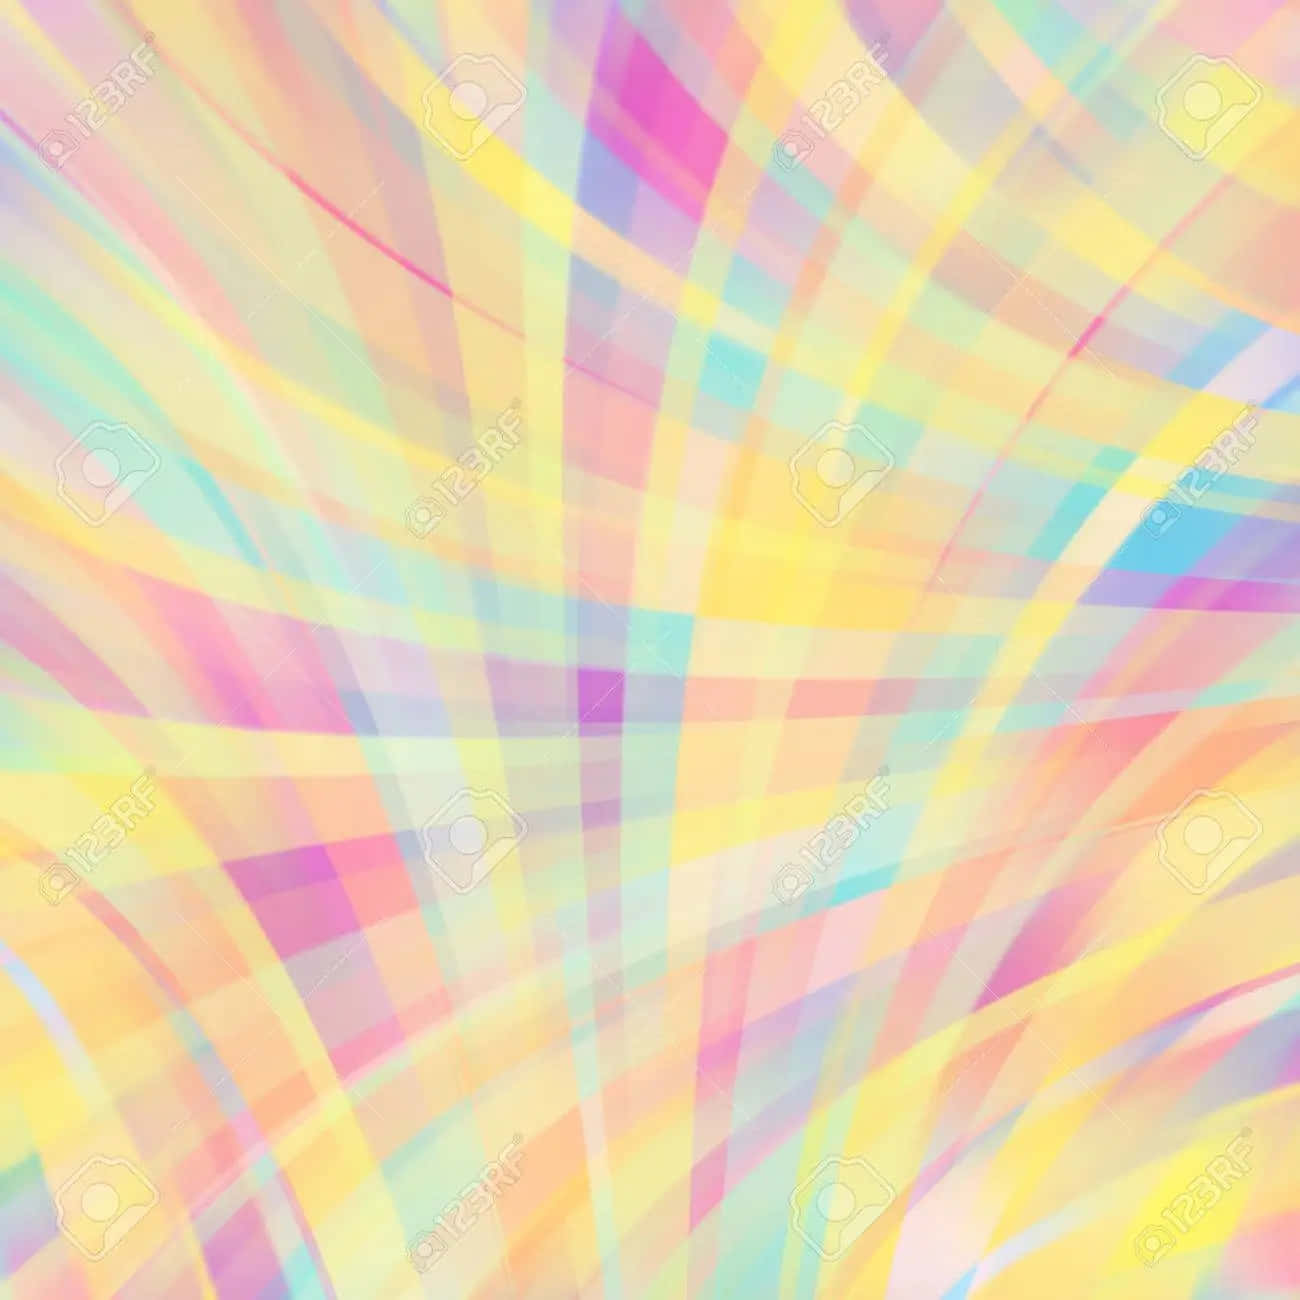 A Colorful World of Pink, Yellow, and Blue Wallpaper